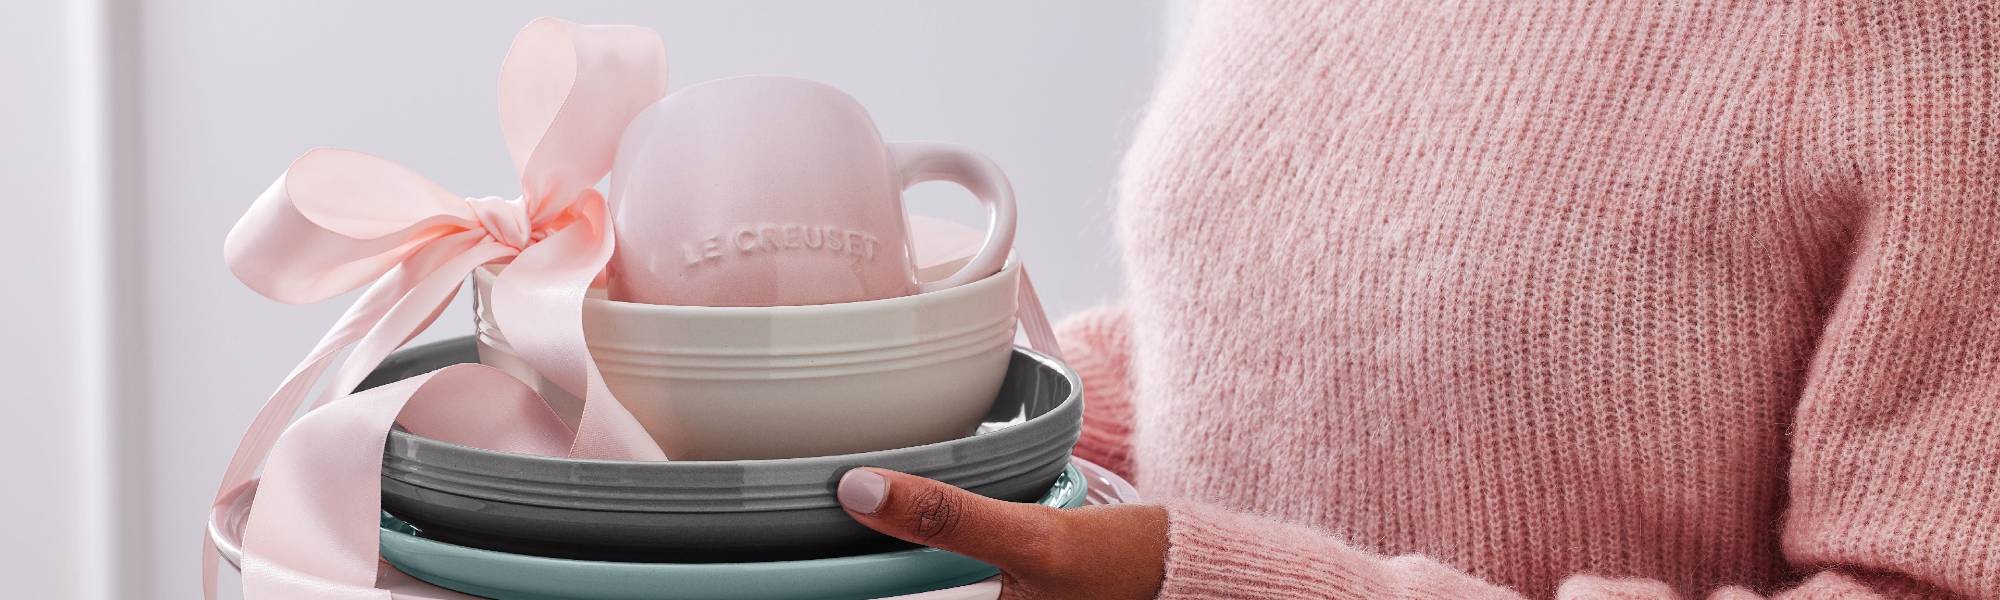 Coupe Collection: New from Le Creuset